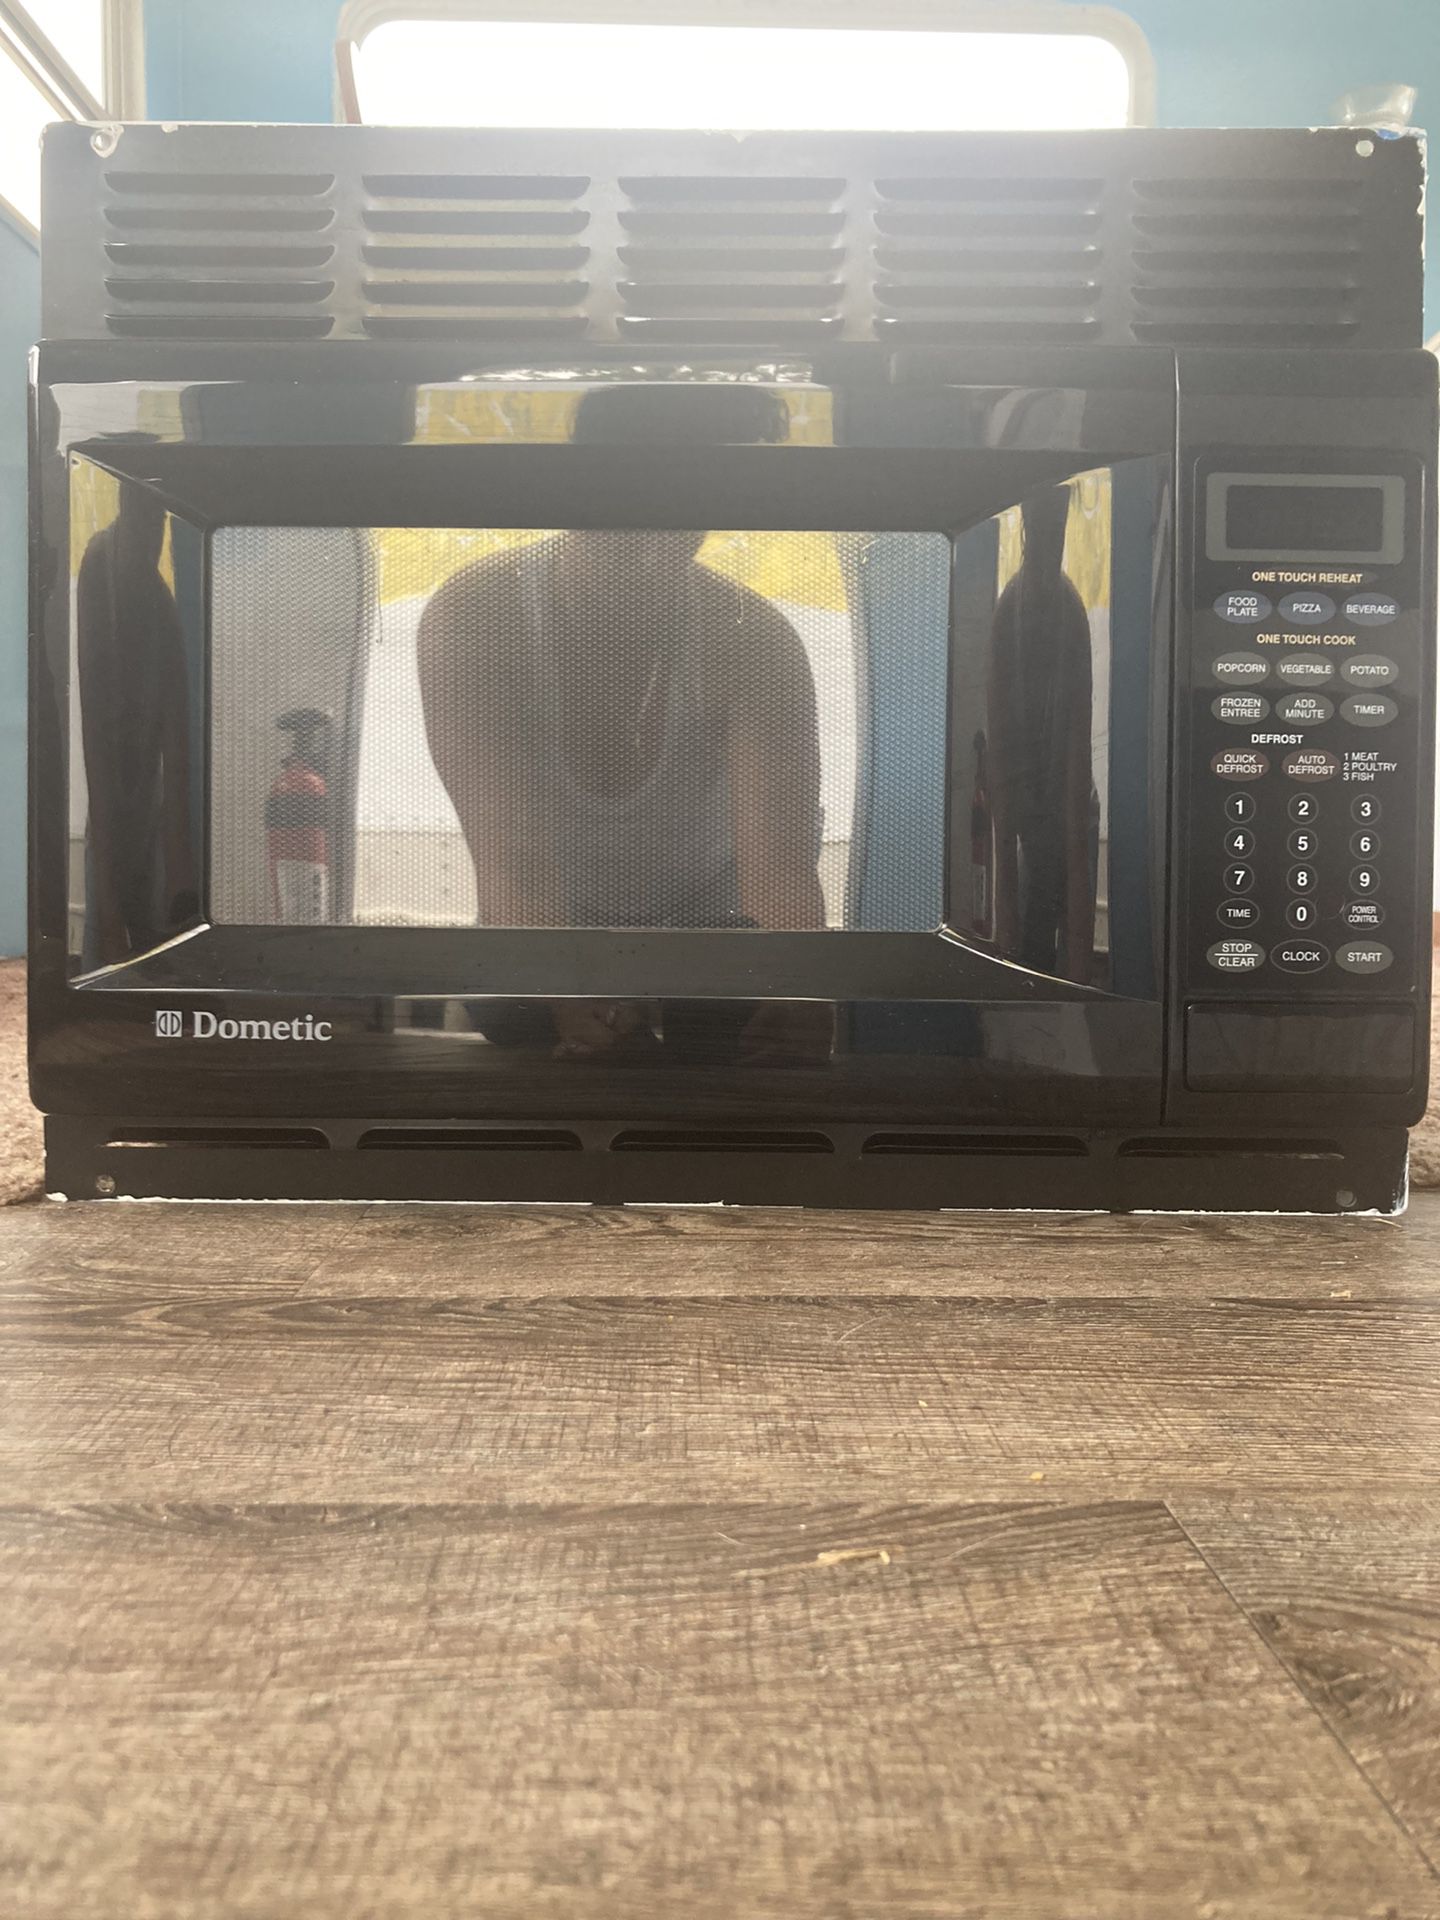 Samsung junior mini compact microwave for dorm or RV camper for Sale in  Allentown, PA - OfferUp